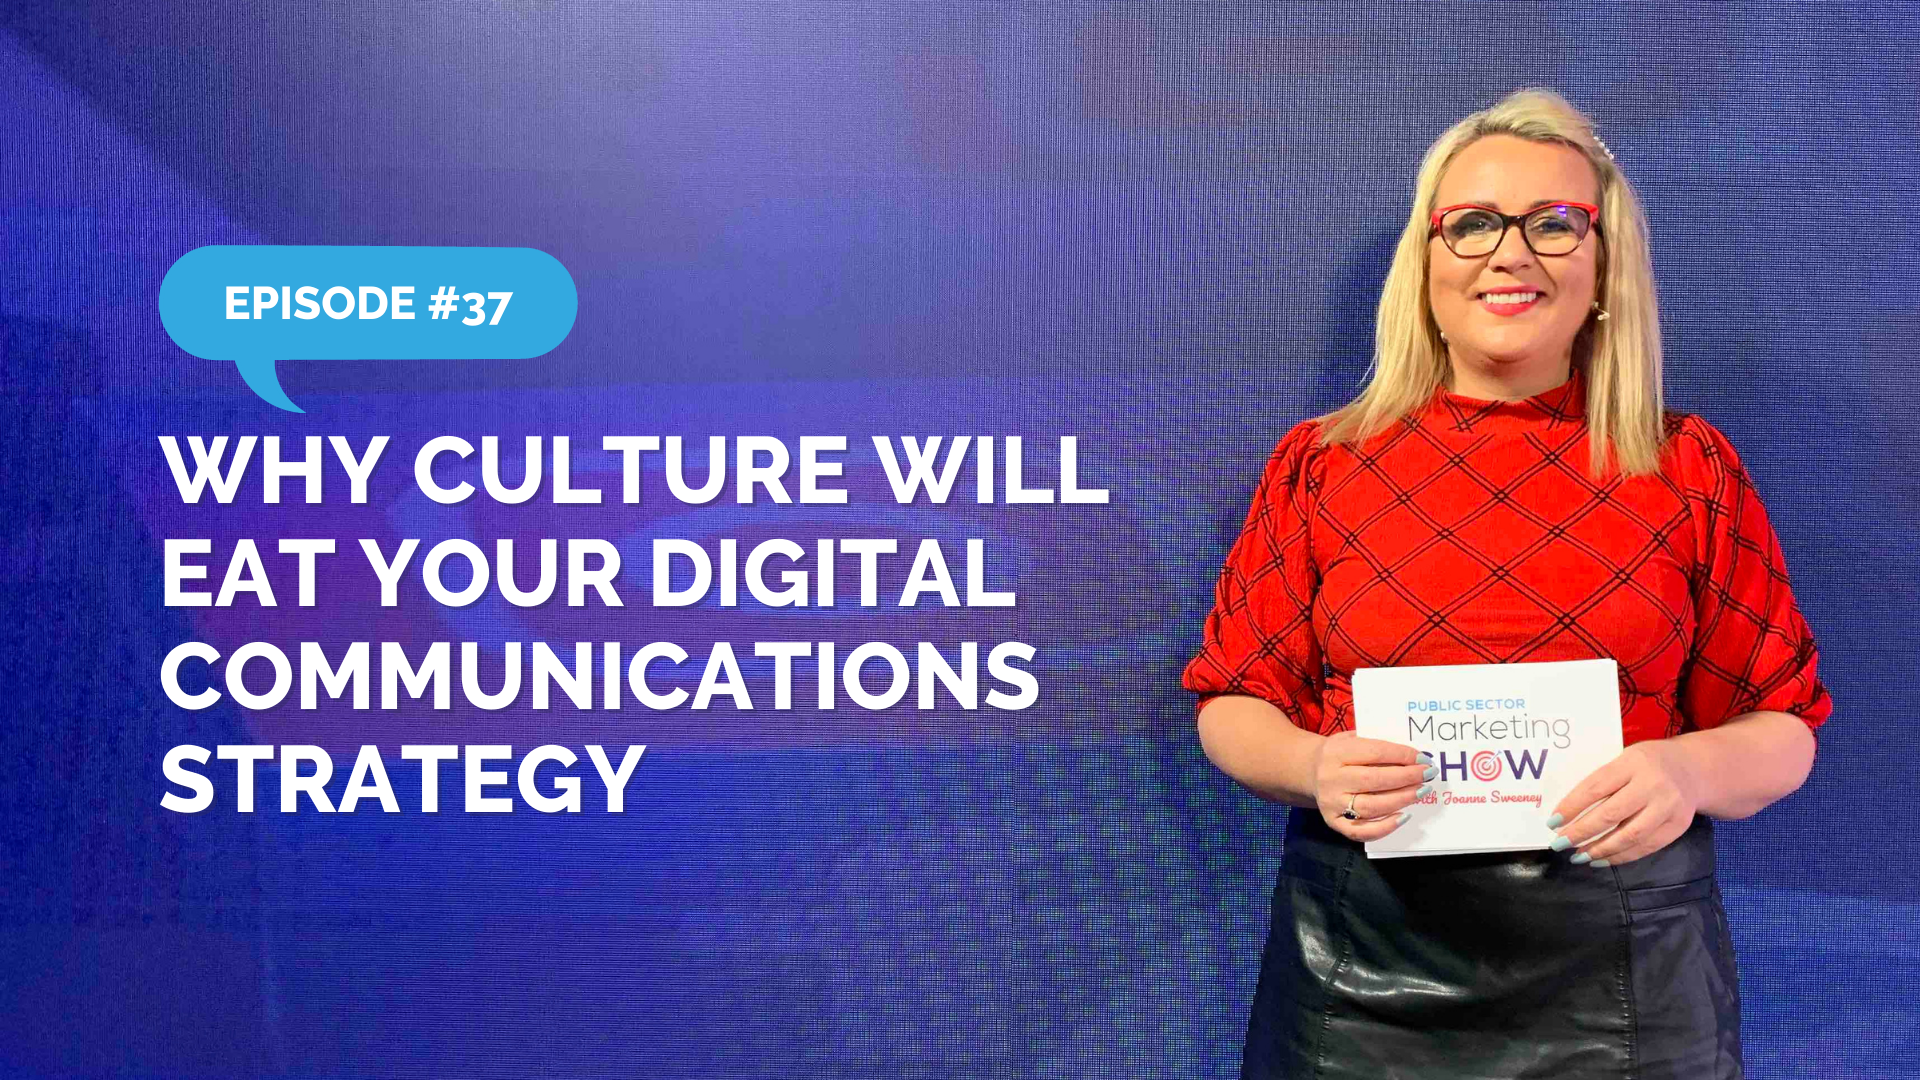 Episode 37 - Why Culture Will Eat Your Digital Communications Strategy